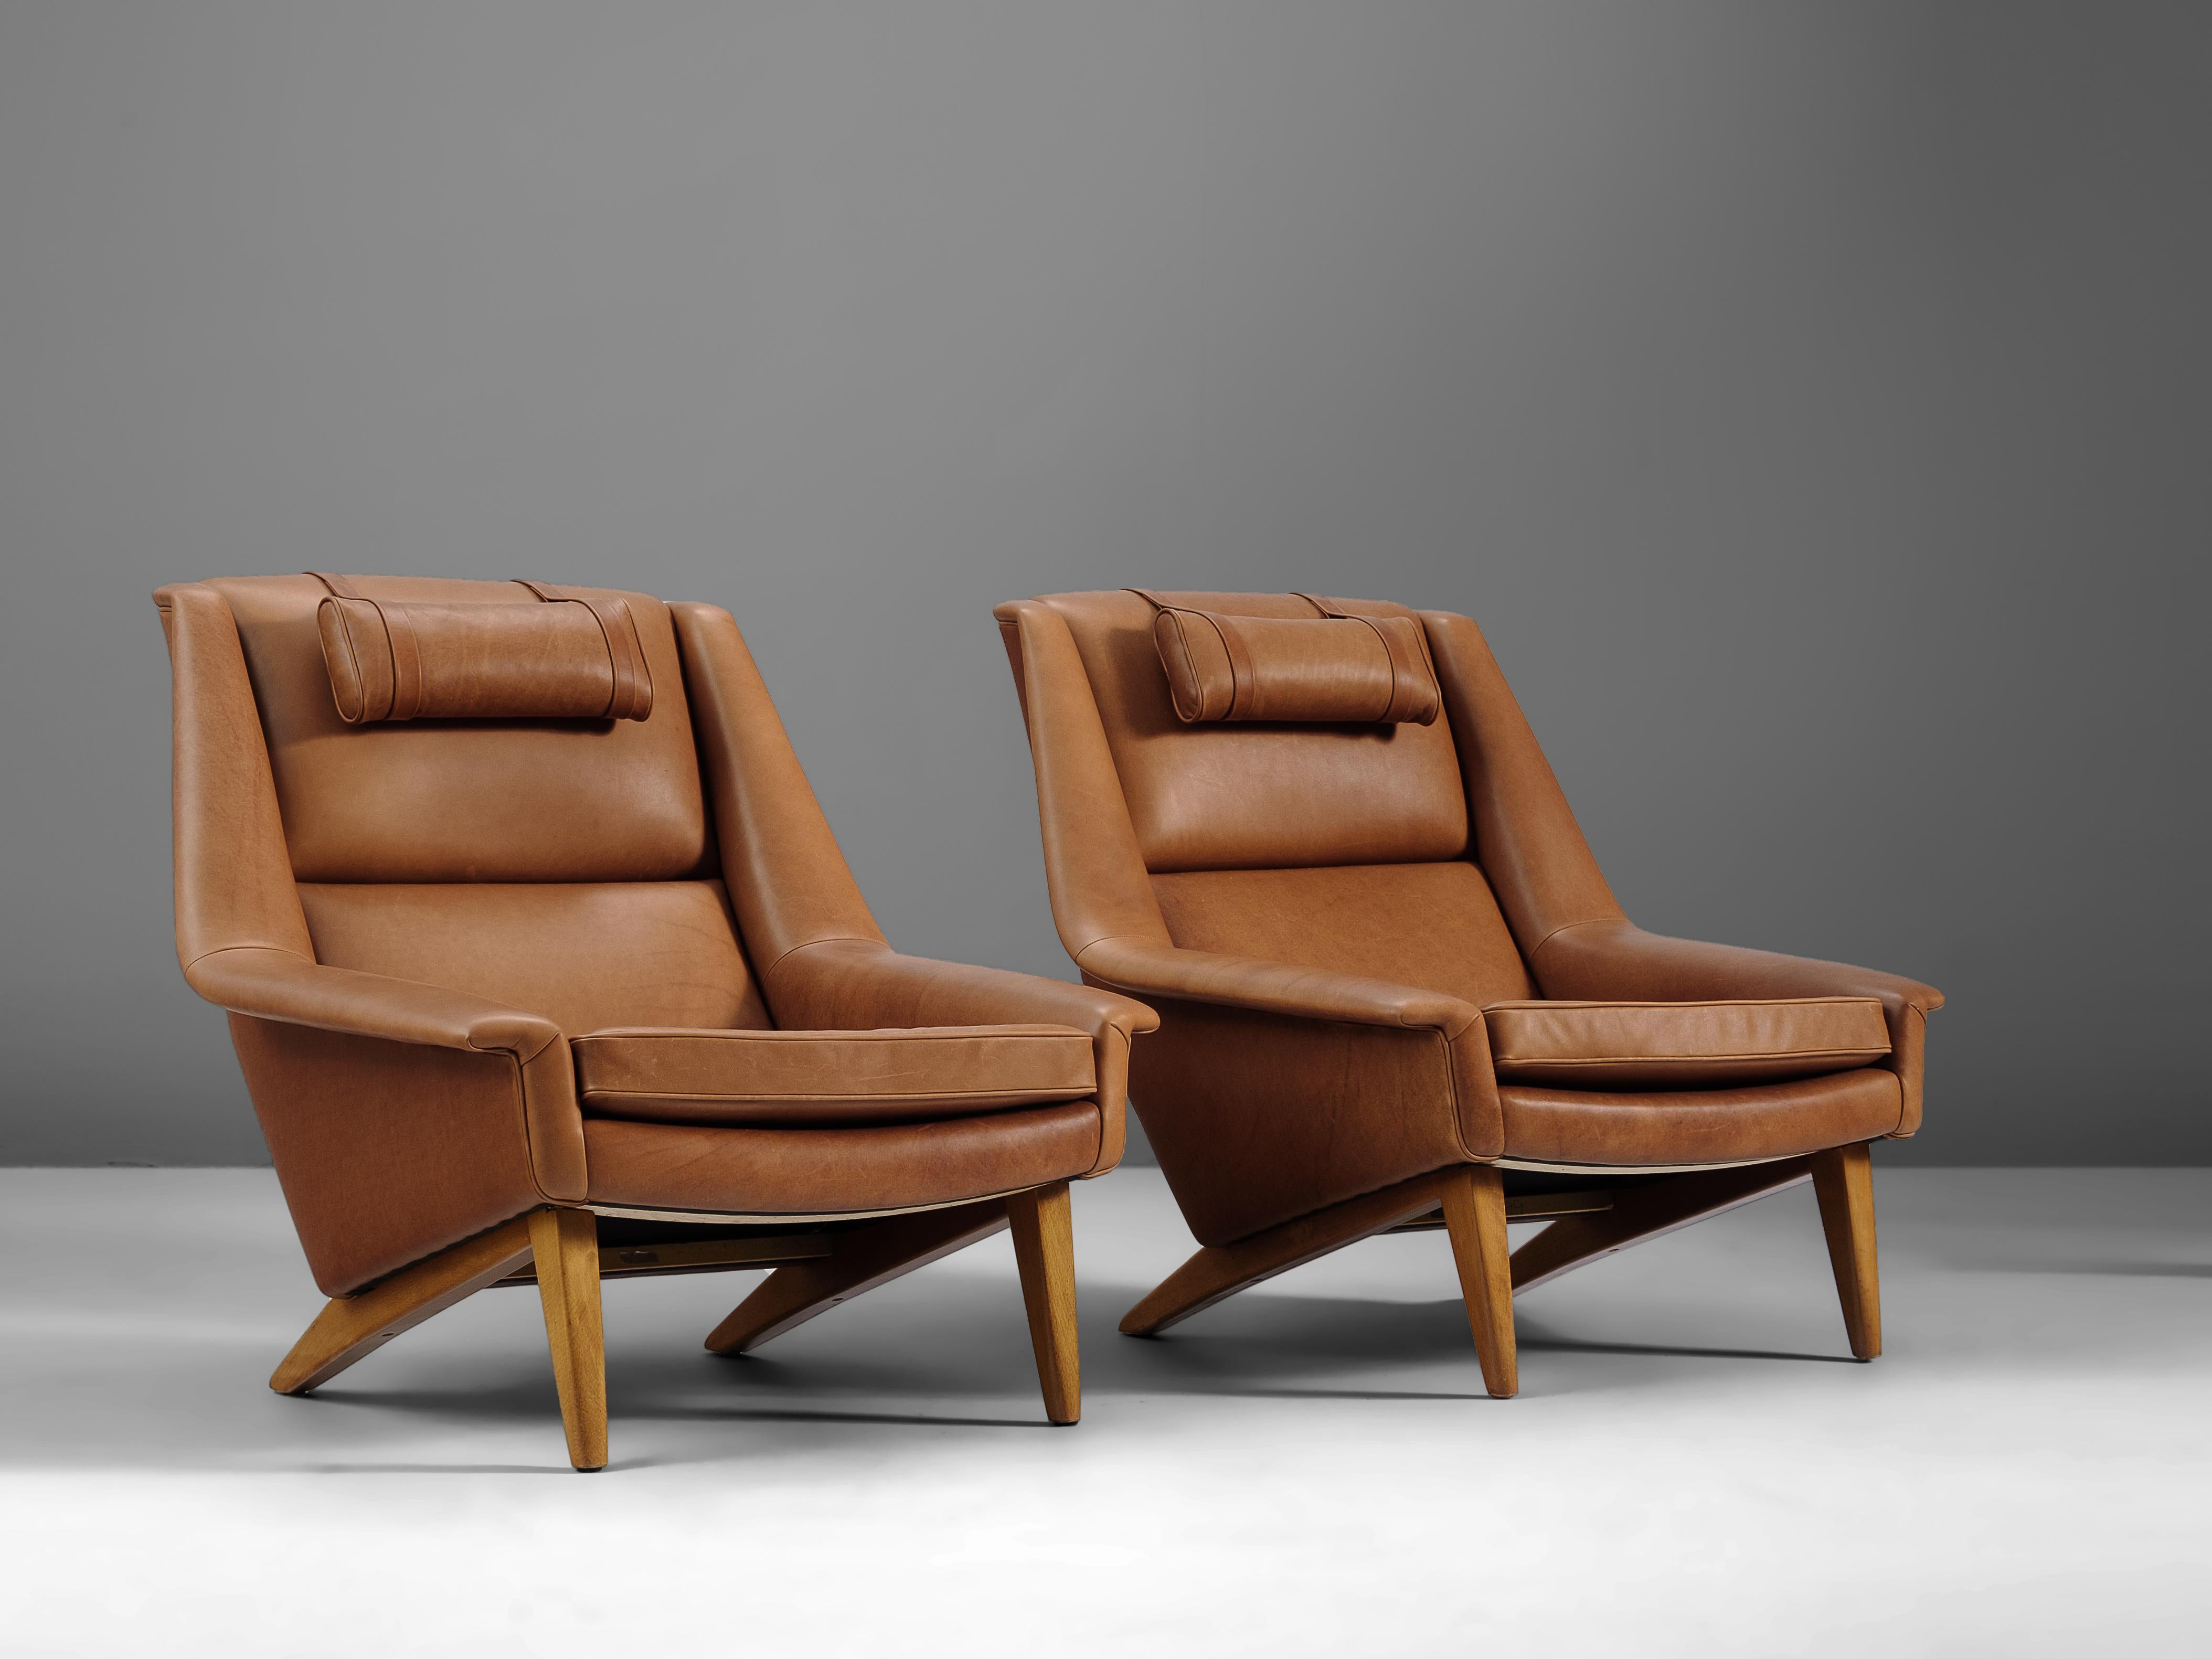 Folke Ohlsson for Fritz Hansen, lounge chairs, in any preferred leather of fabric, teak, Denmark, designed in 1957

These high quality made lounge chairs are made to reach an ultimate level of comfort as can clearly be recognized in the design.